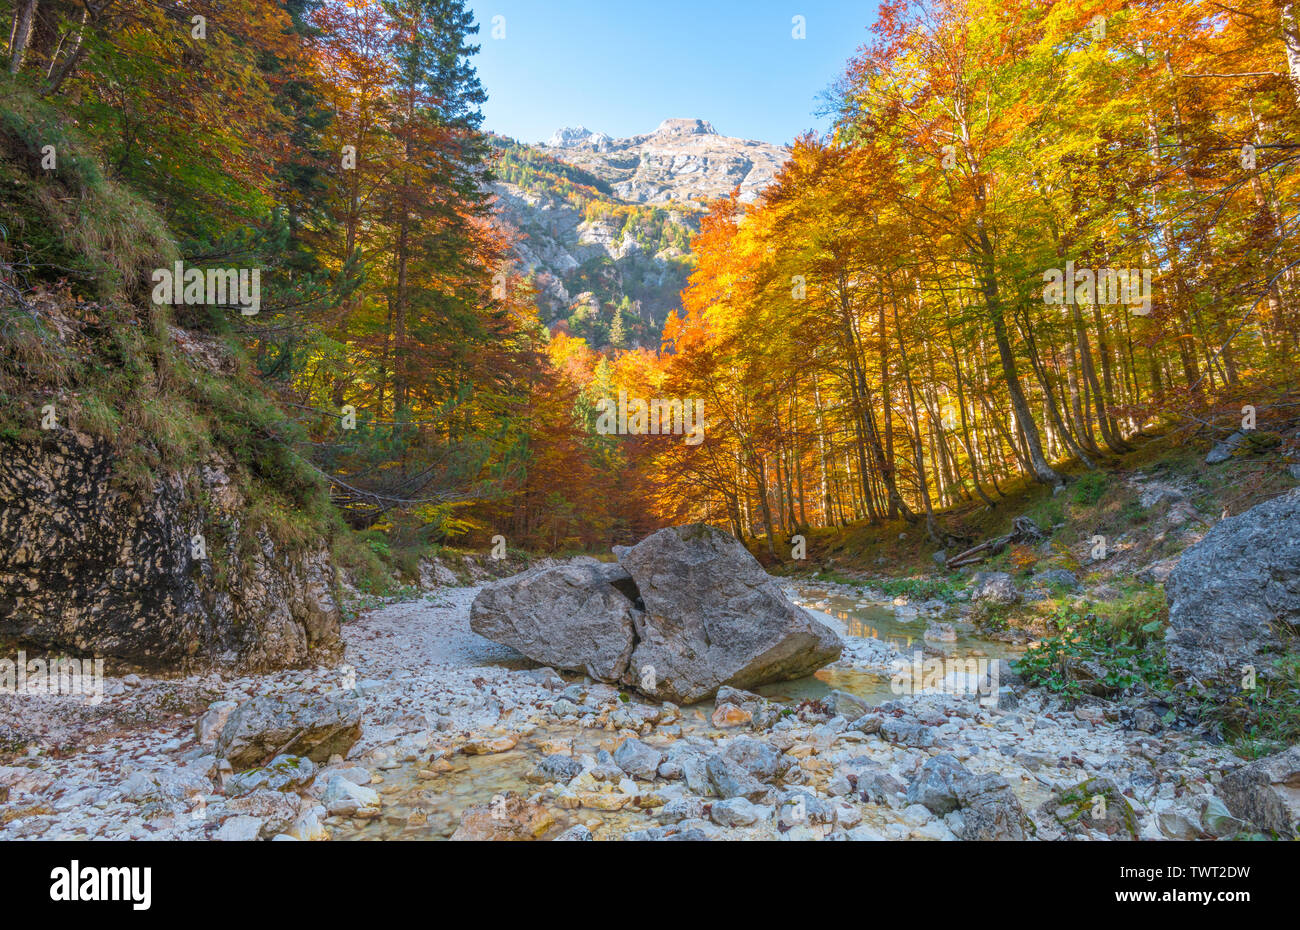 Views of the Slovenian Alps from a dry river bed in the autumn forest. Fall colours, foliage in October. Quiet hiking trail during season change. Stock Photo